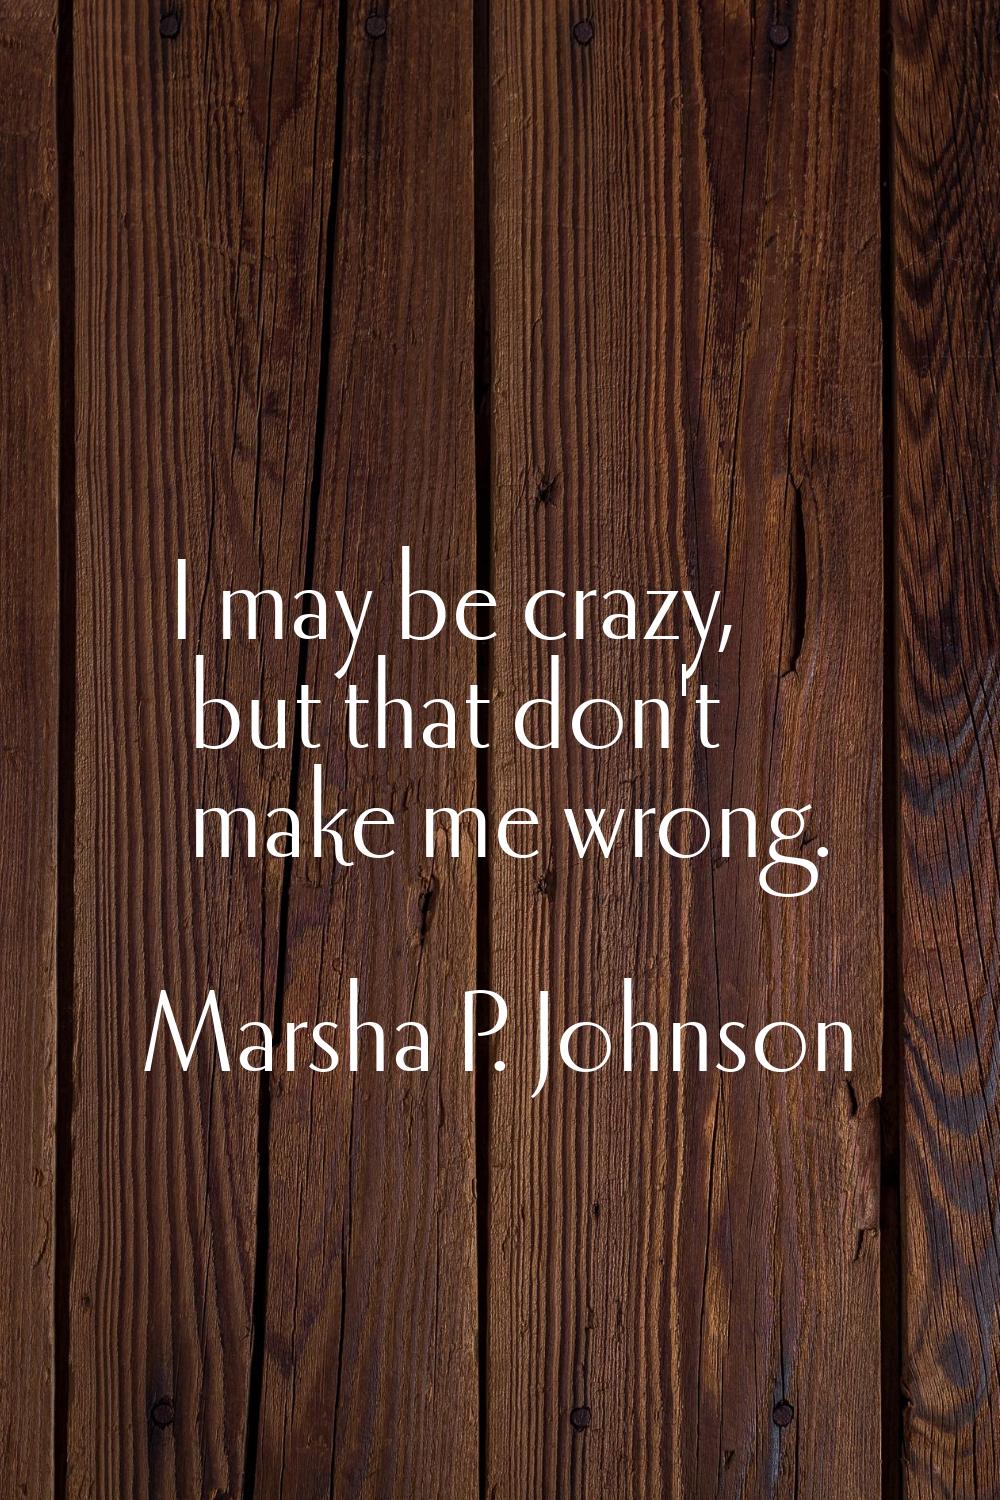 I may be crazy, but that don't make me wrong.